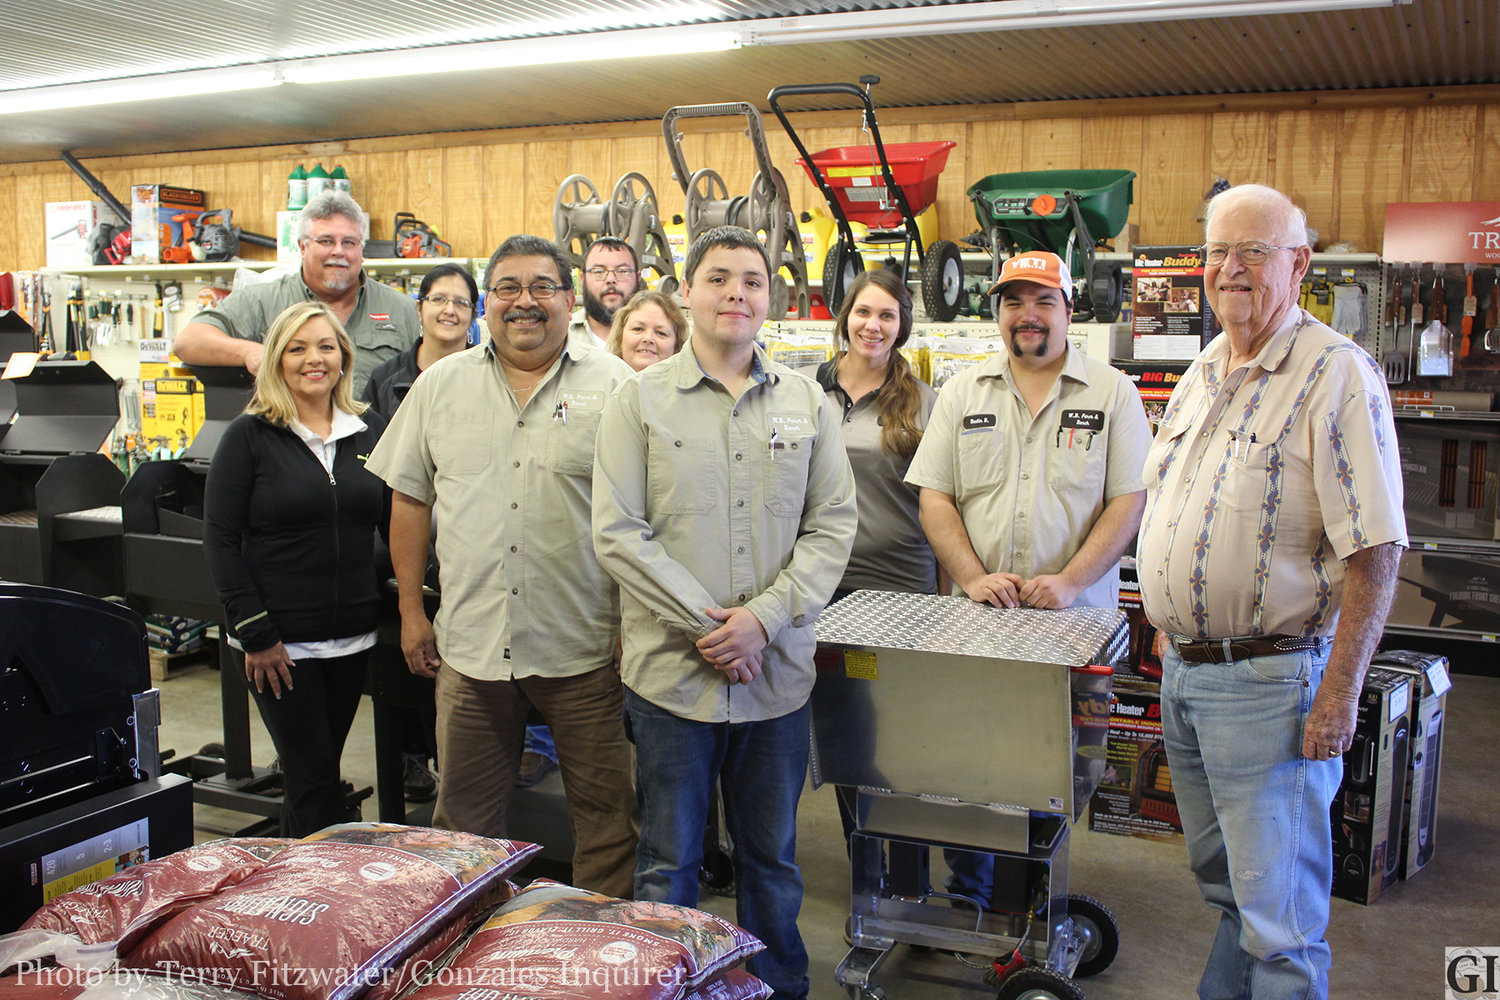 The staff and family of Wayne Brown provide a great family atmosphere to do business in at WB.